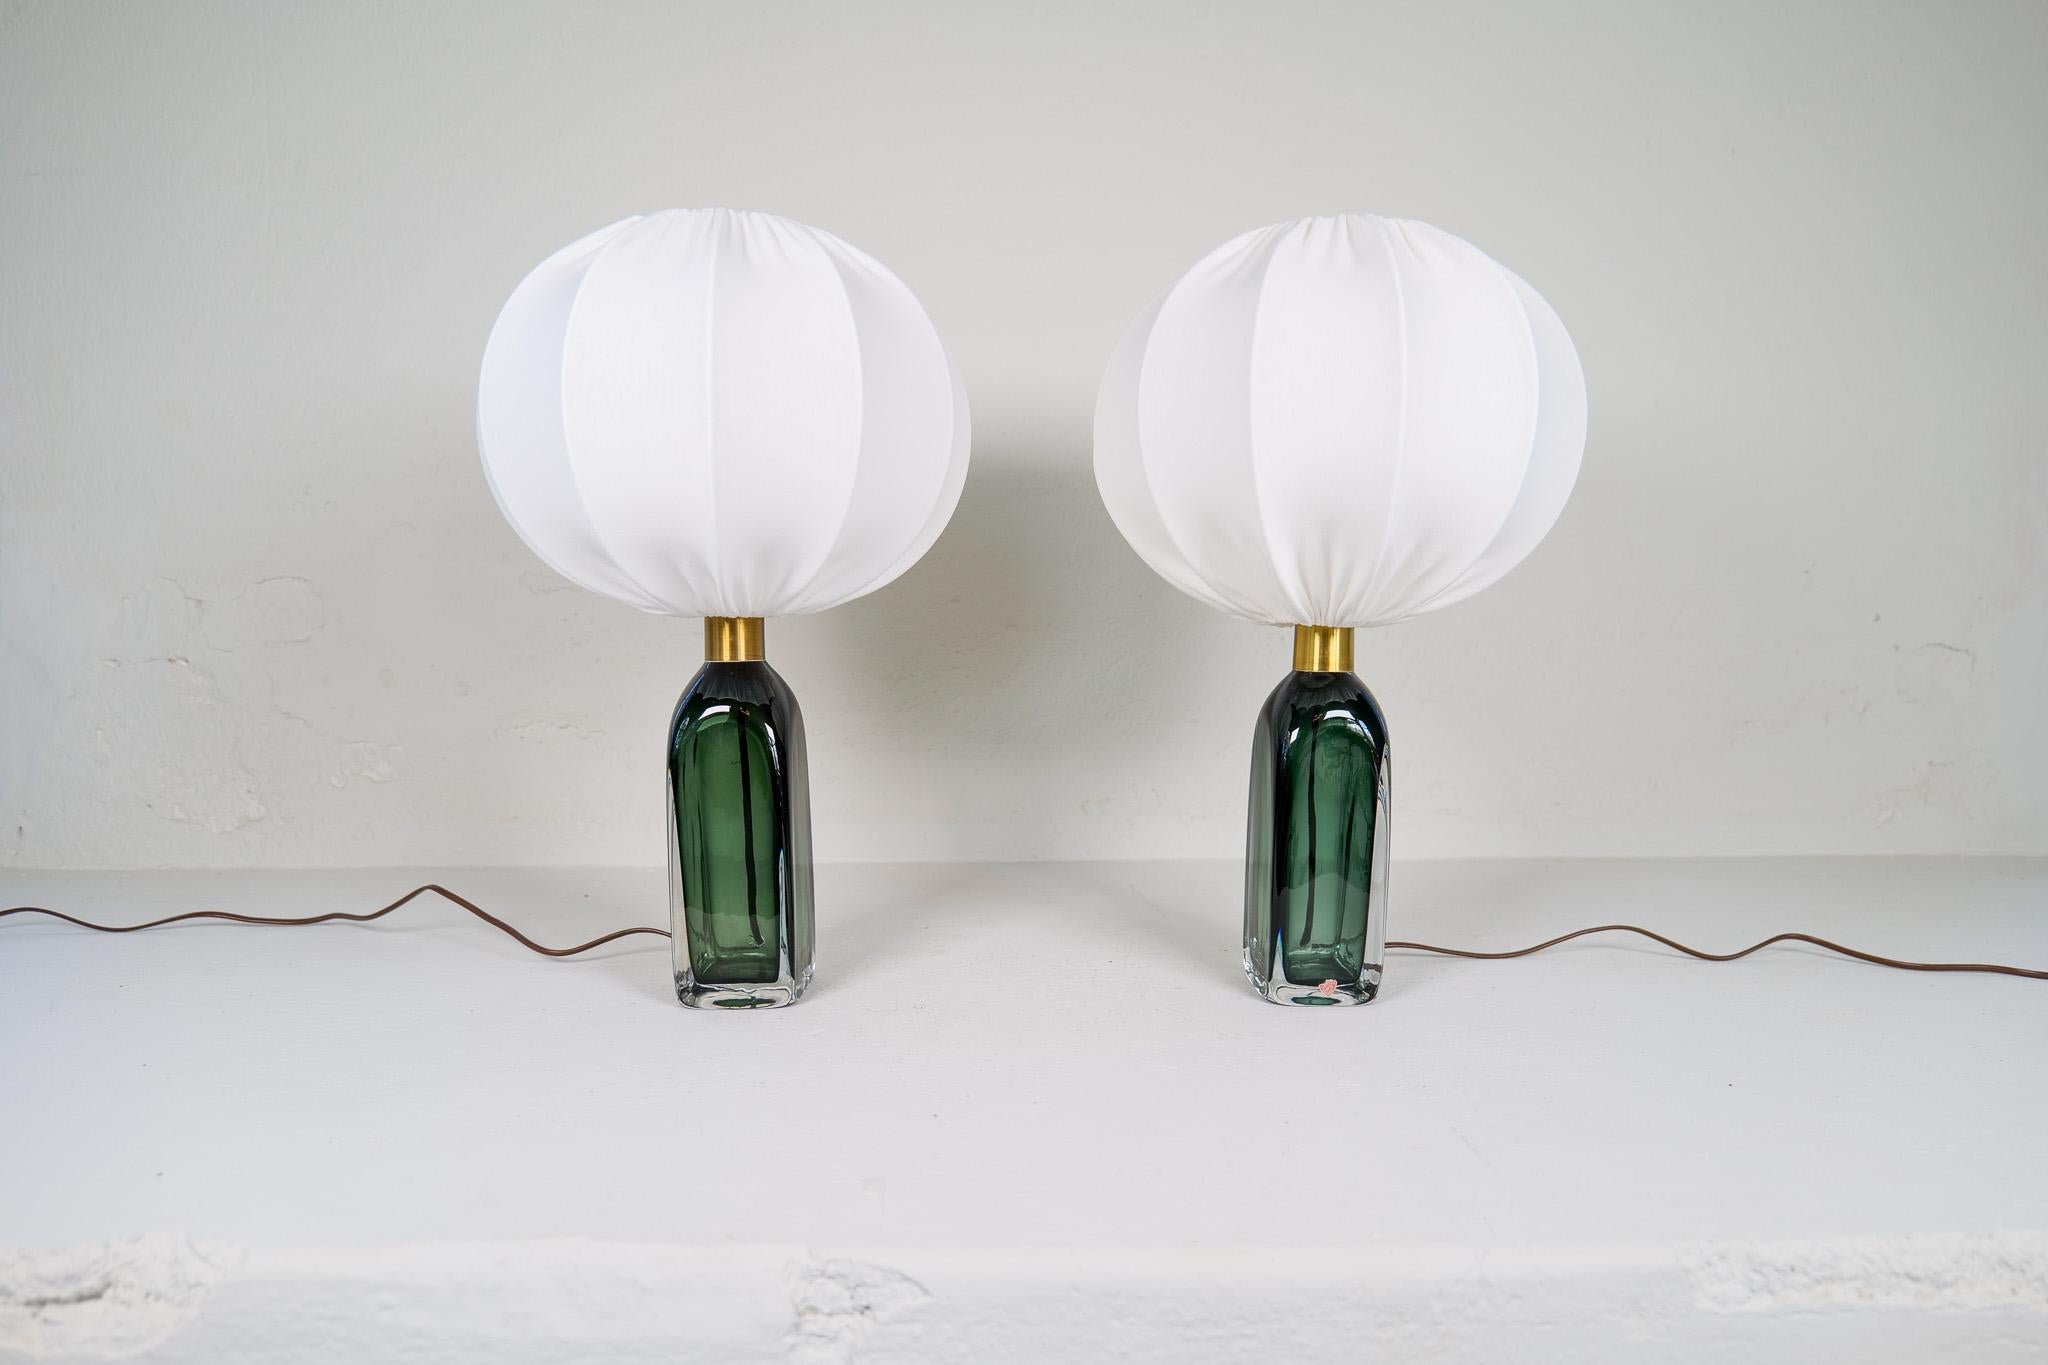 Midcentury Modern Table Lamps by Carl Fagerlund for Orrefors Sweden RD 1406 In Good Condition For Sale In Hillringsberg, SE